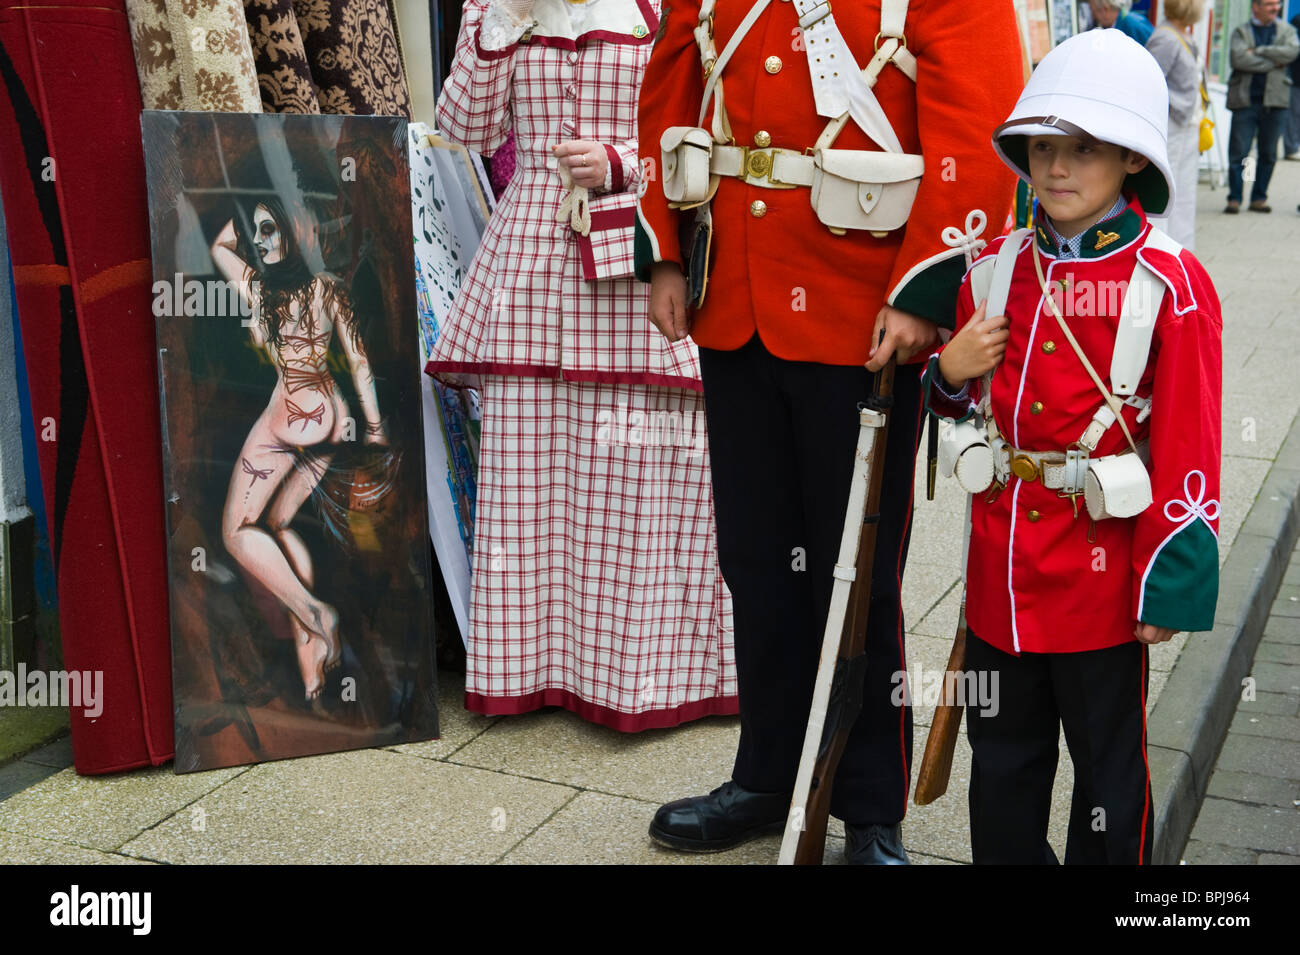 Man and boy in period military uniform with lady at the Victorian Festival in Llandrindod Wells Powys Mid Wales UK Stock Photo